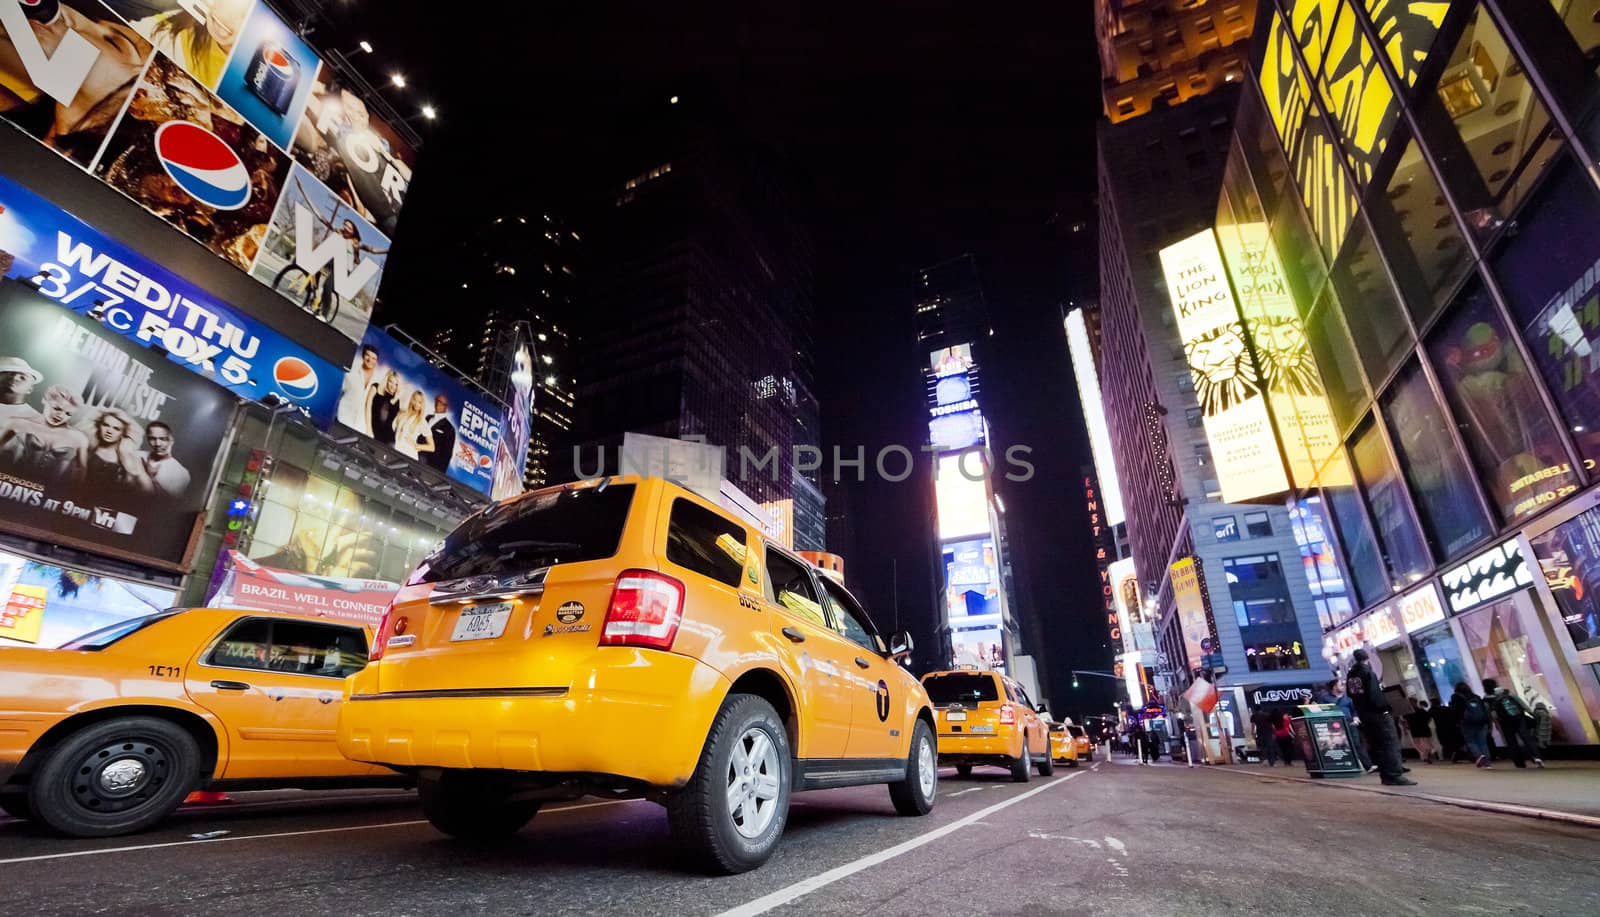 NEW YORK CITY - SEPT 18: Times Square by hanusst